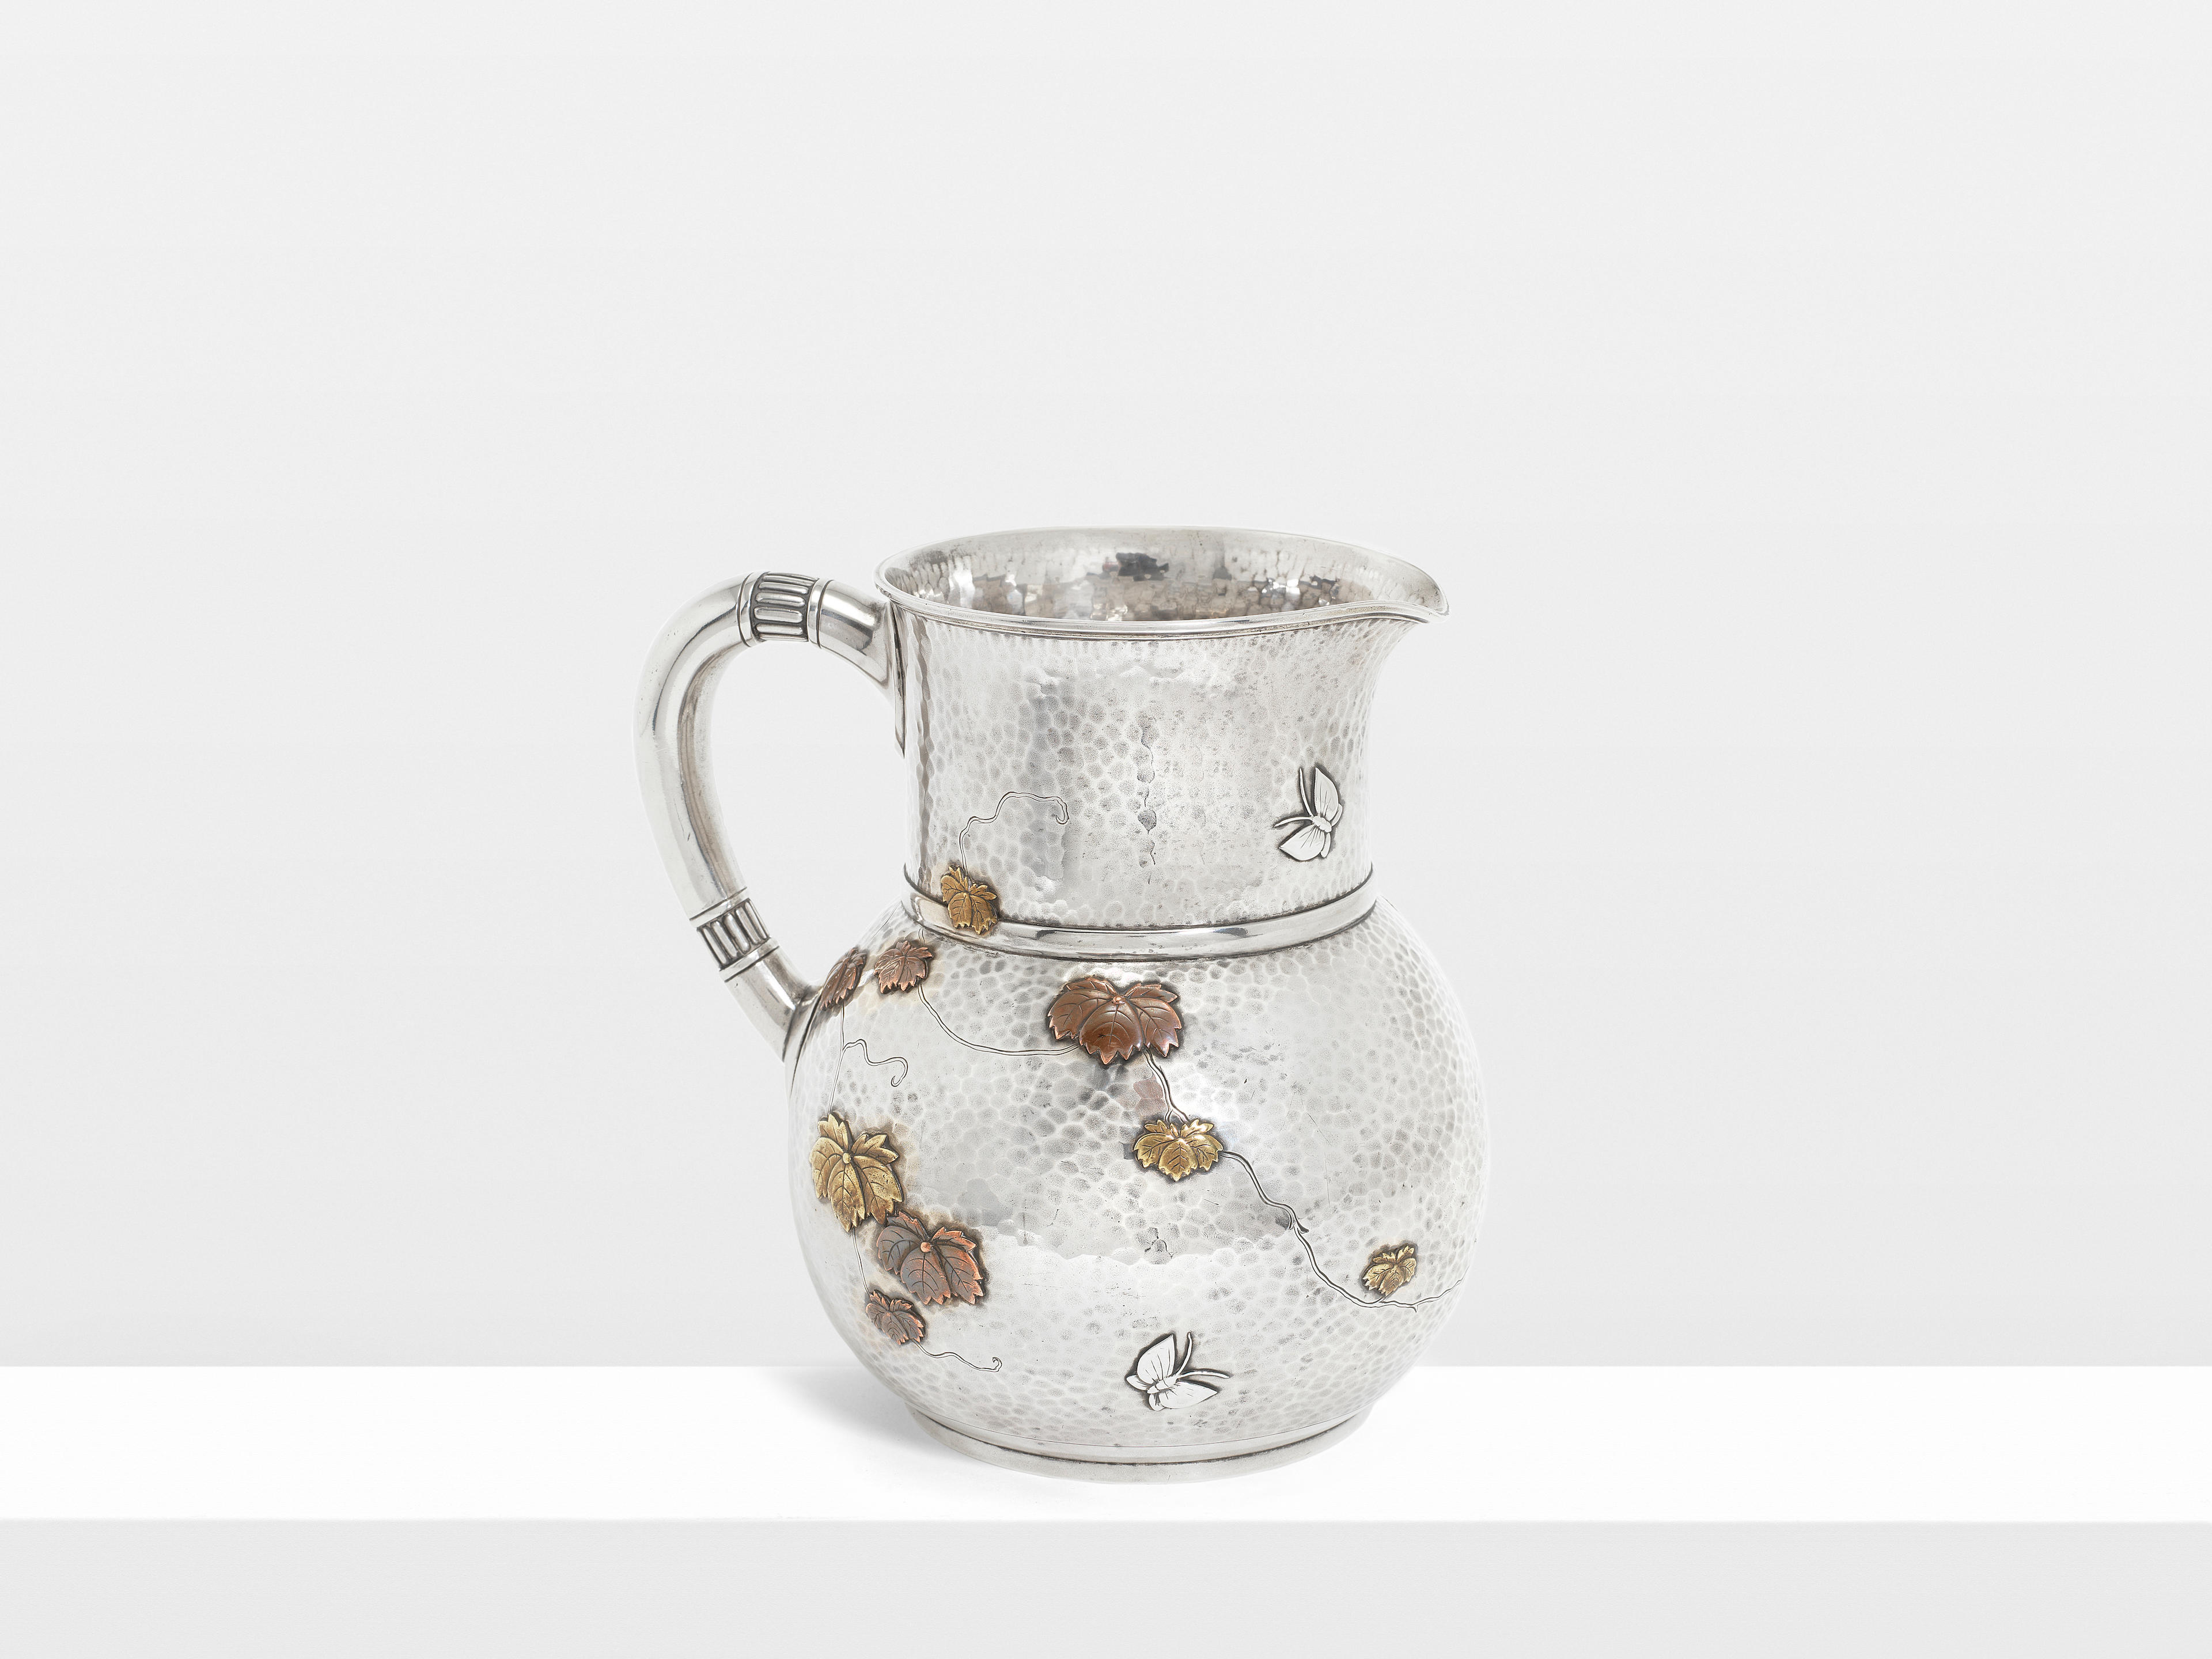 An American silver and mixed metals pitcher